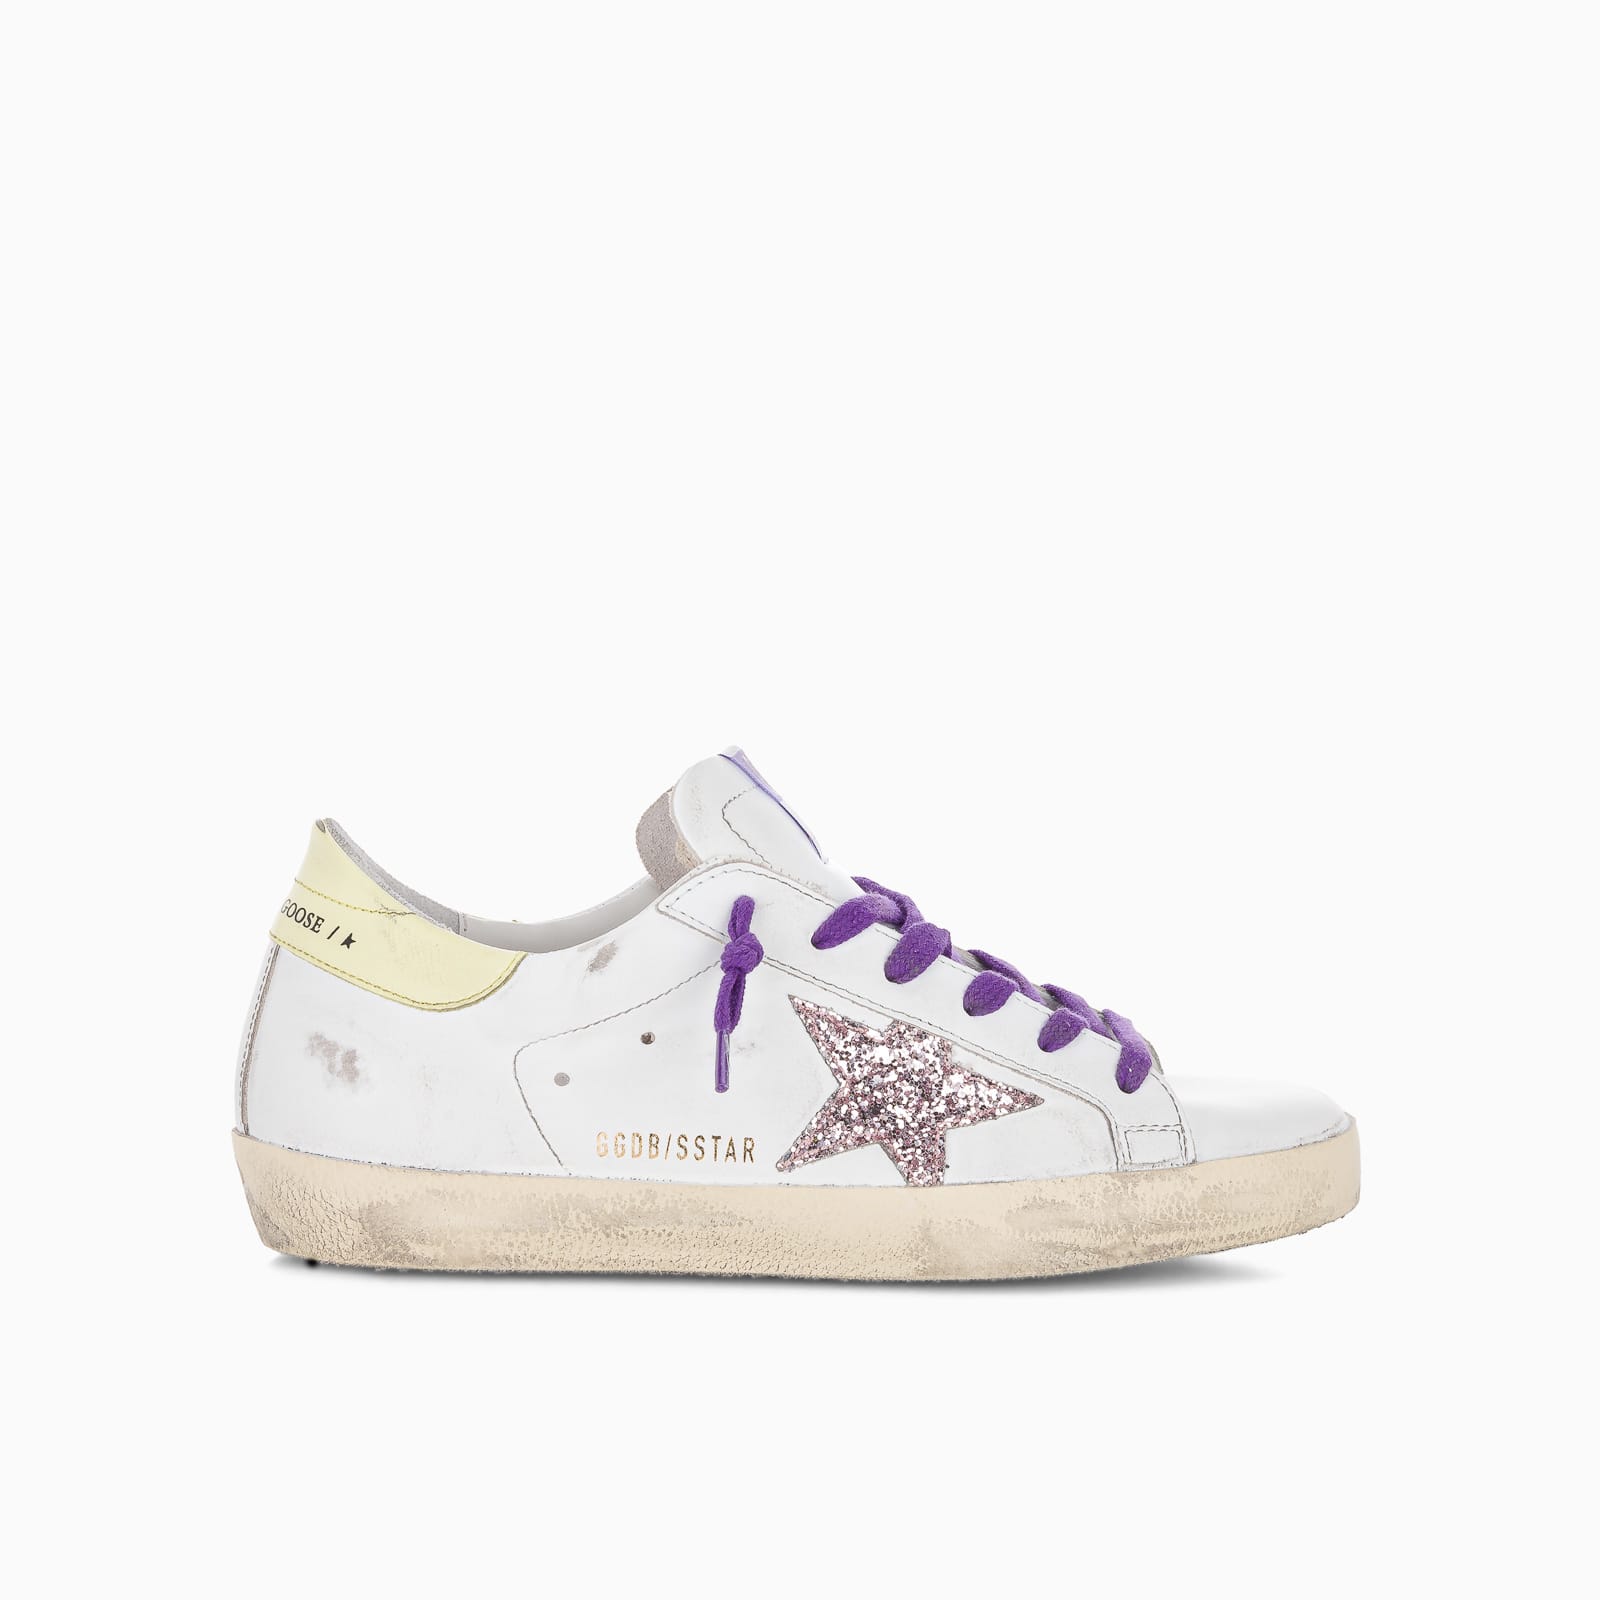 Buy Golden Goose Superstar Sneakers With Glitter Star online, shop Golden Goose shoes with free shipping